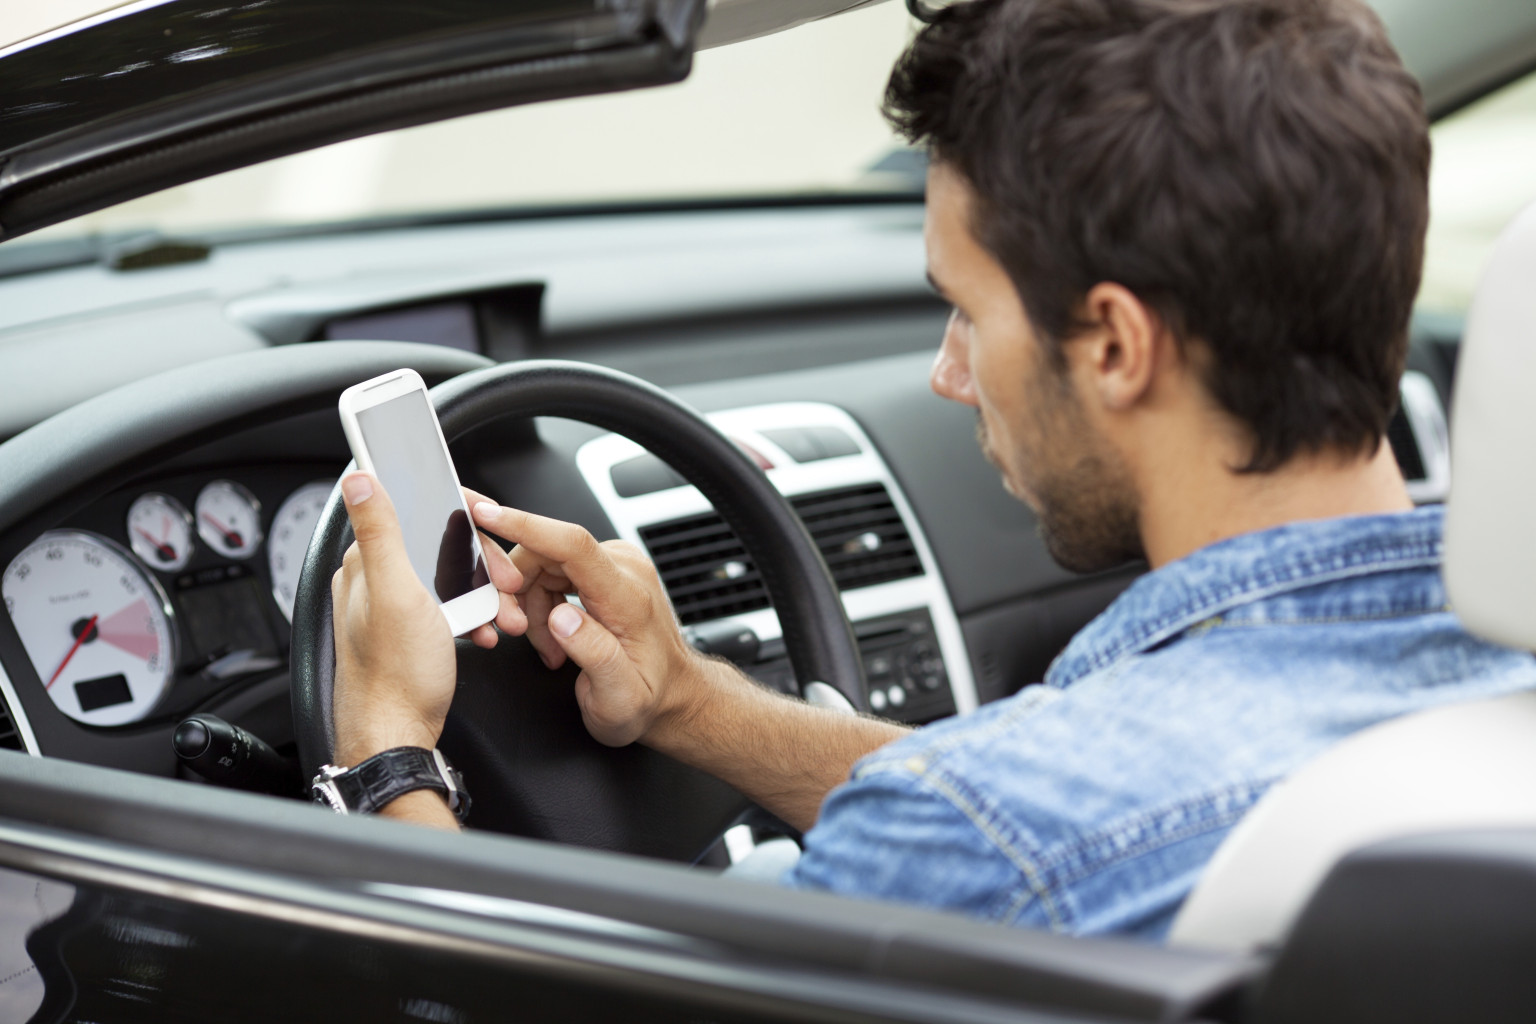 California Texting While Driving Has Become More Popular Since Being